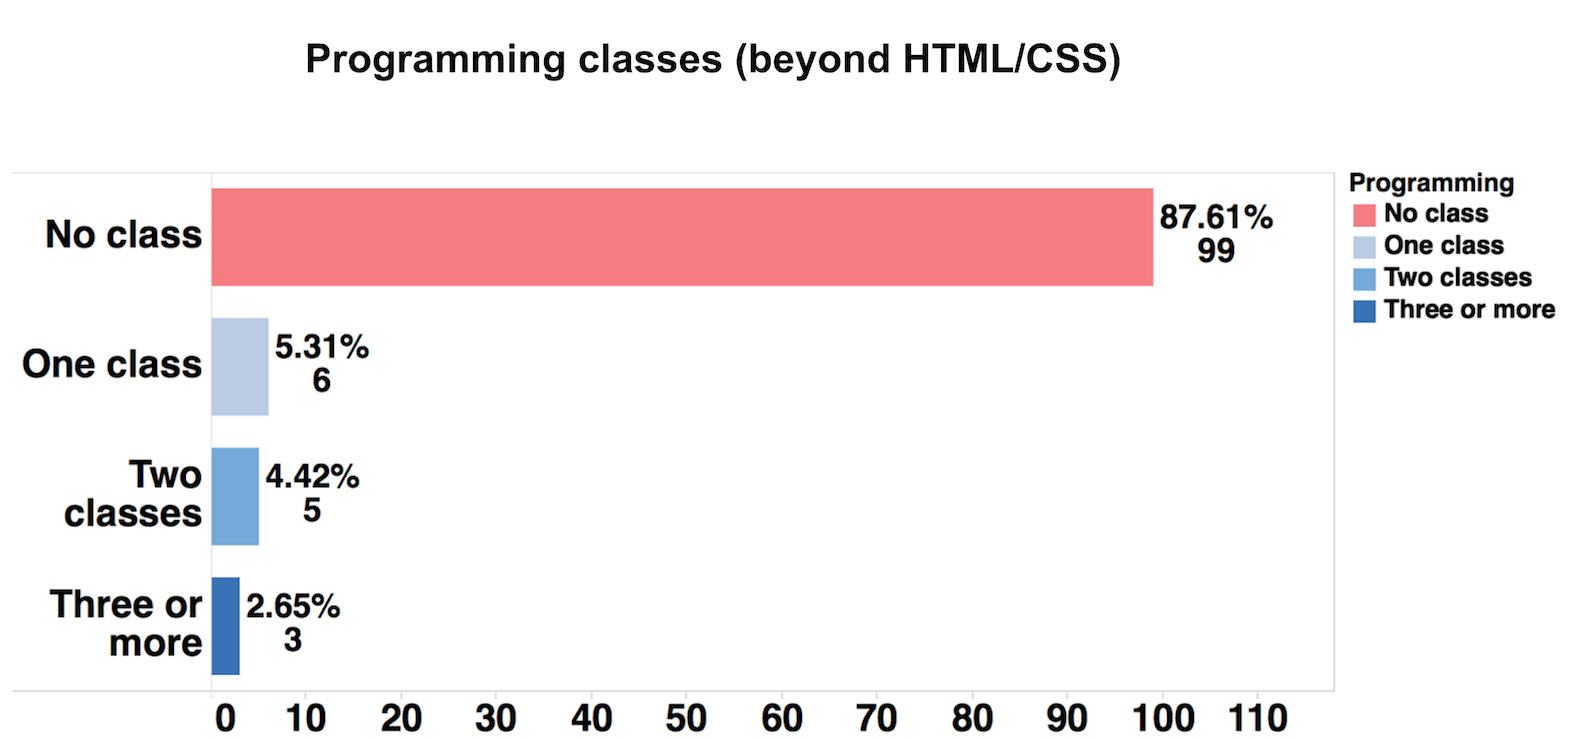 The number of classes at ACEJMC-accredited schools teaching programming beyond HTML/CSS